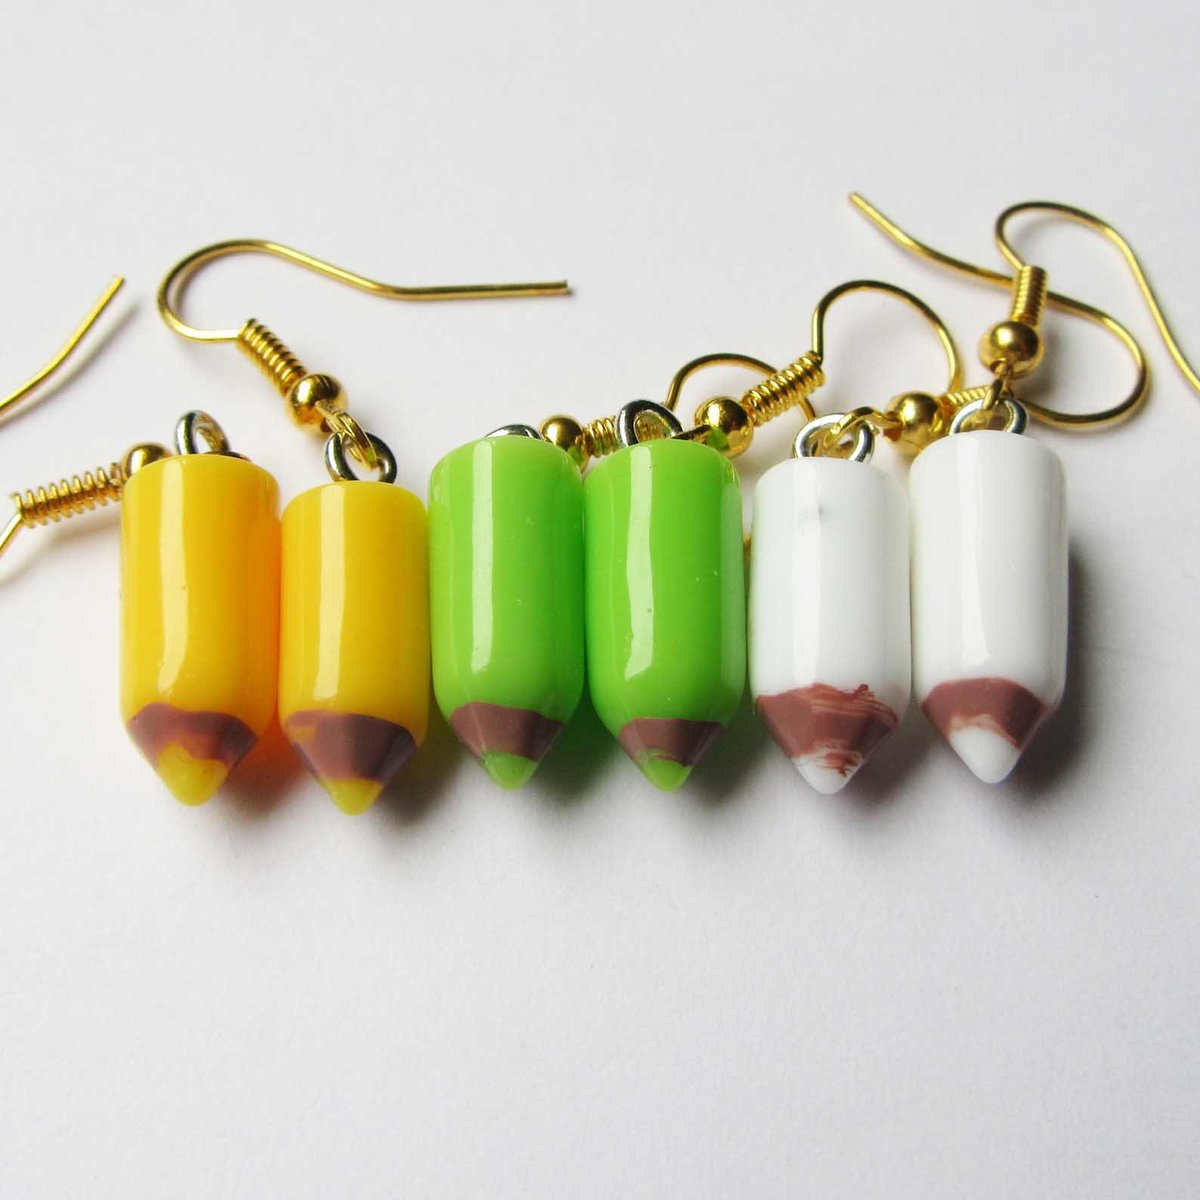 Excited to share the latest addition to my #etsy shop: Pencil crayon earrings in various colours teacher gift etsy.me/3KsBZ0k #unisexadults #earlobe #teacher #teachersgift #pencil #crayon #earrings #cute #quirky